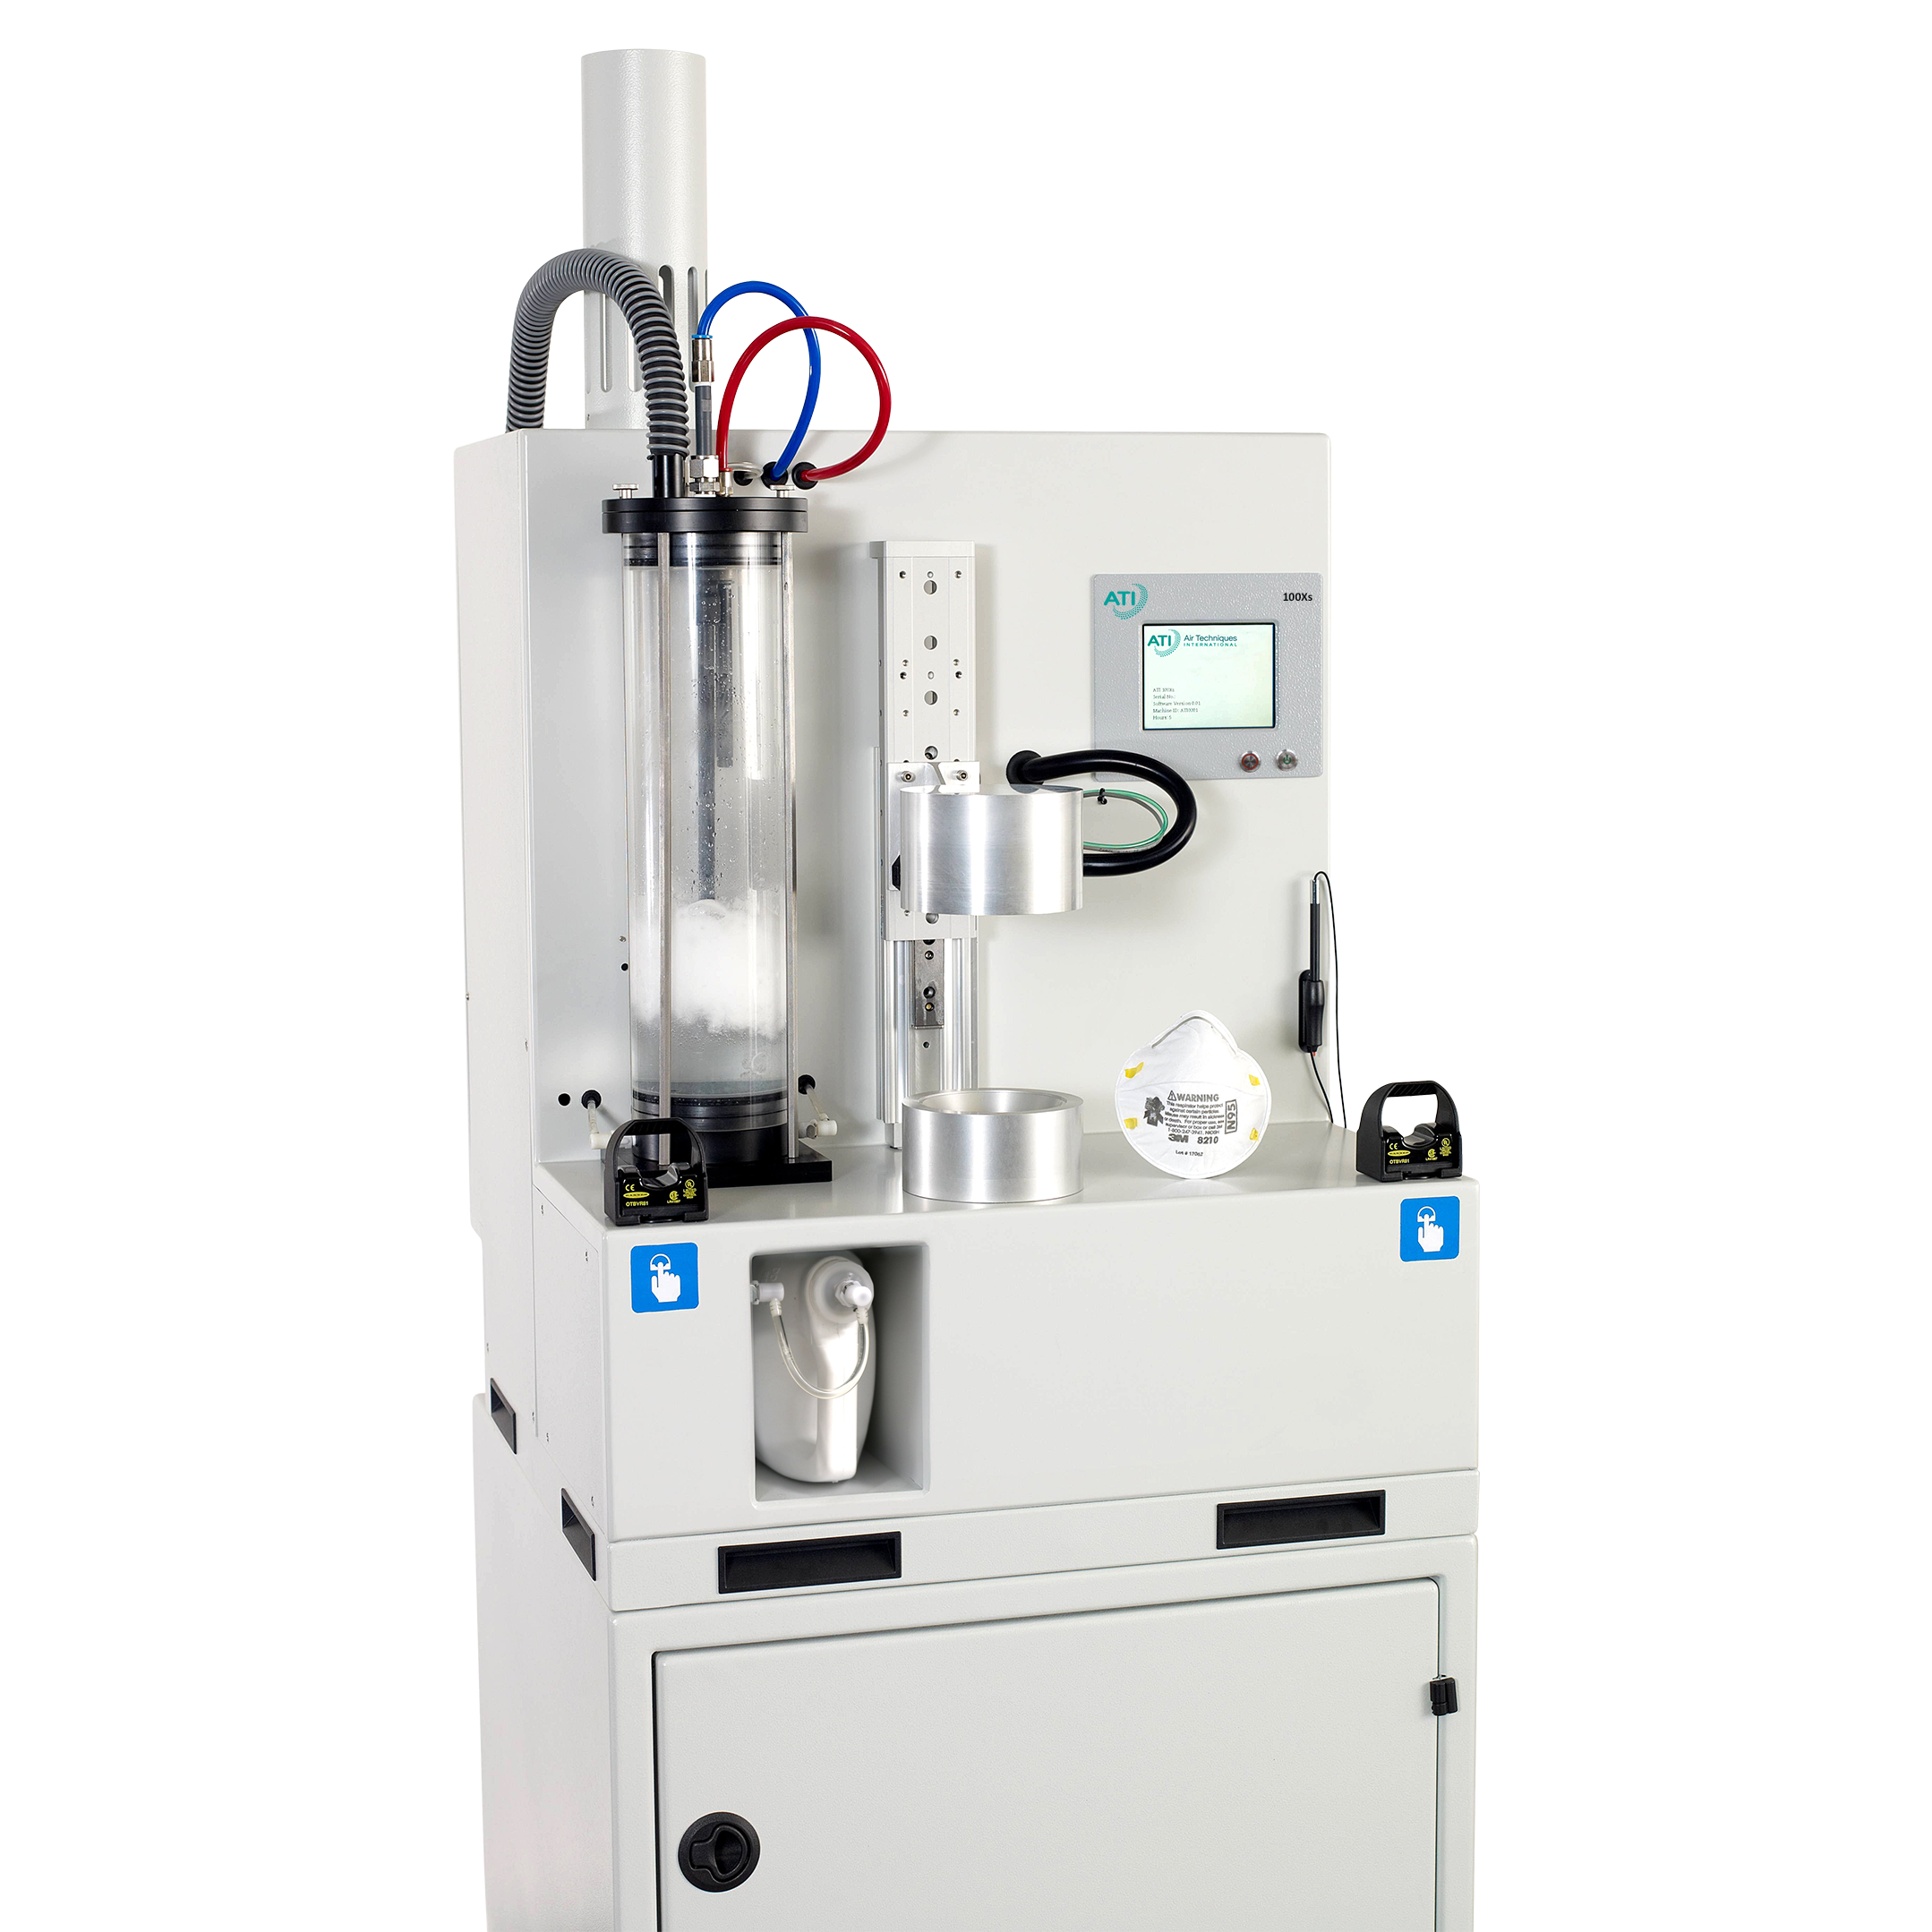 The 100X  is a compact test unit designed for production, quality control, and R&D applications for testing and validation of filter media, cartridges, and masks.